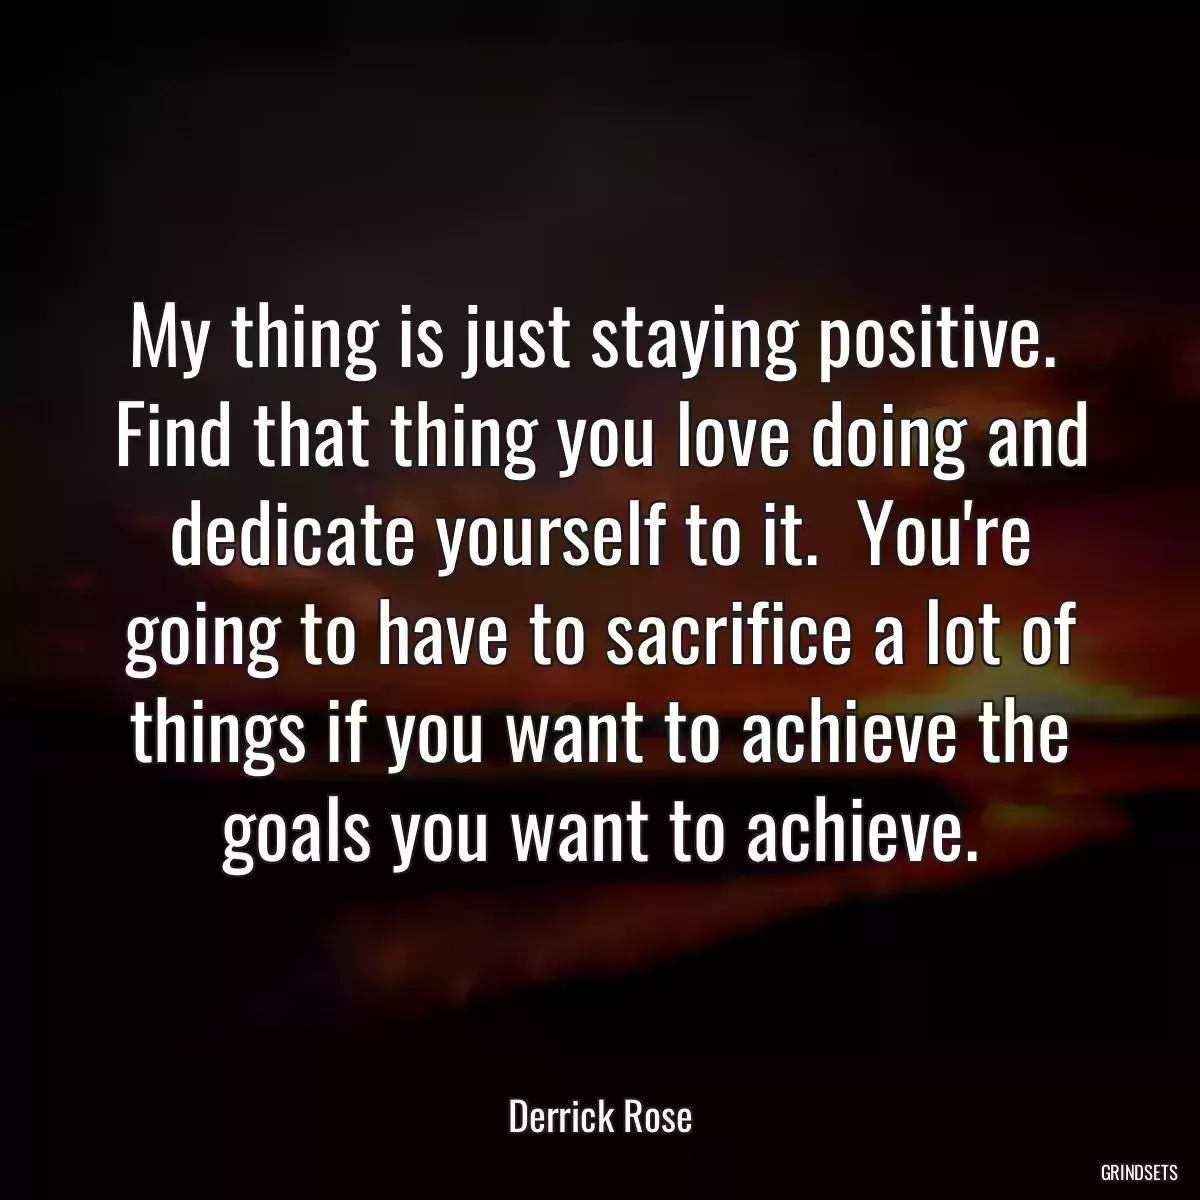 My thing is just staying positive.  Find that thing you love doing and dedicate yourself to it.  You\'re going to have to sacrifice a lot of things if you want to achieve the goals you want to achieve.